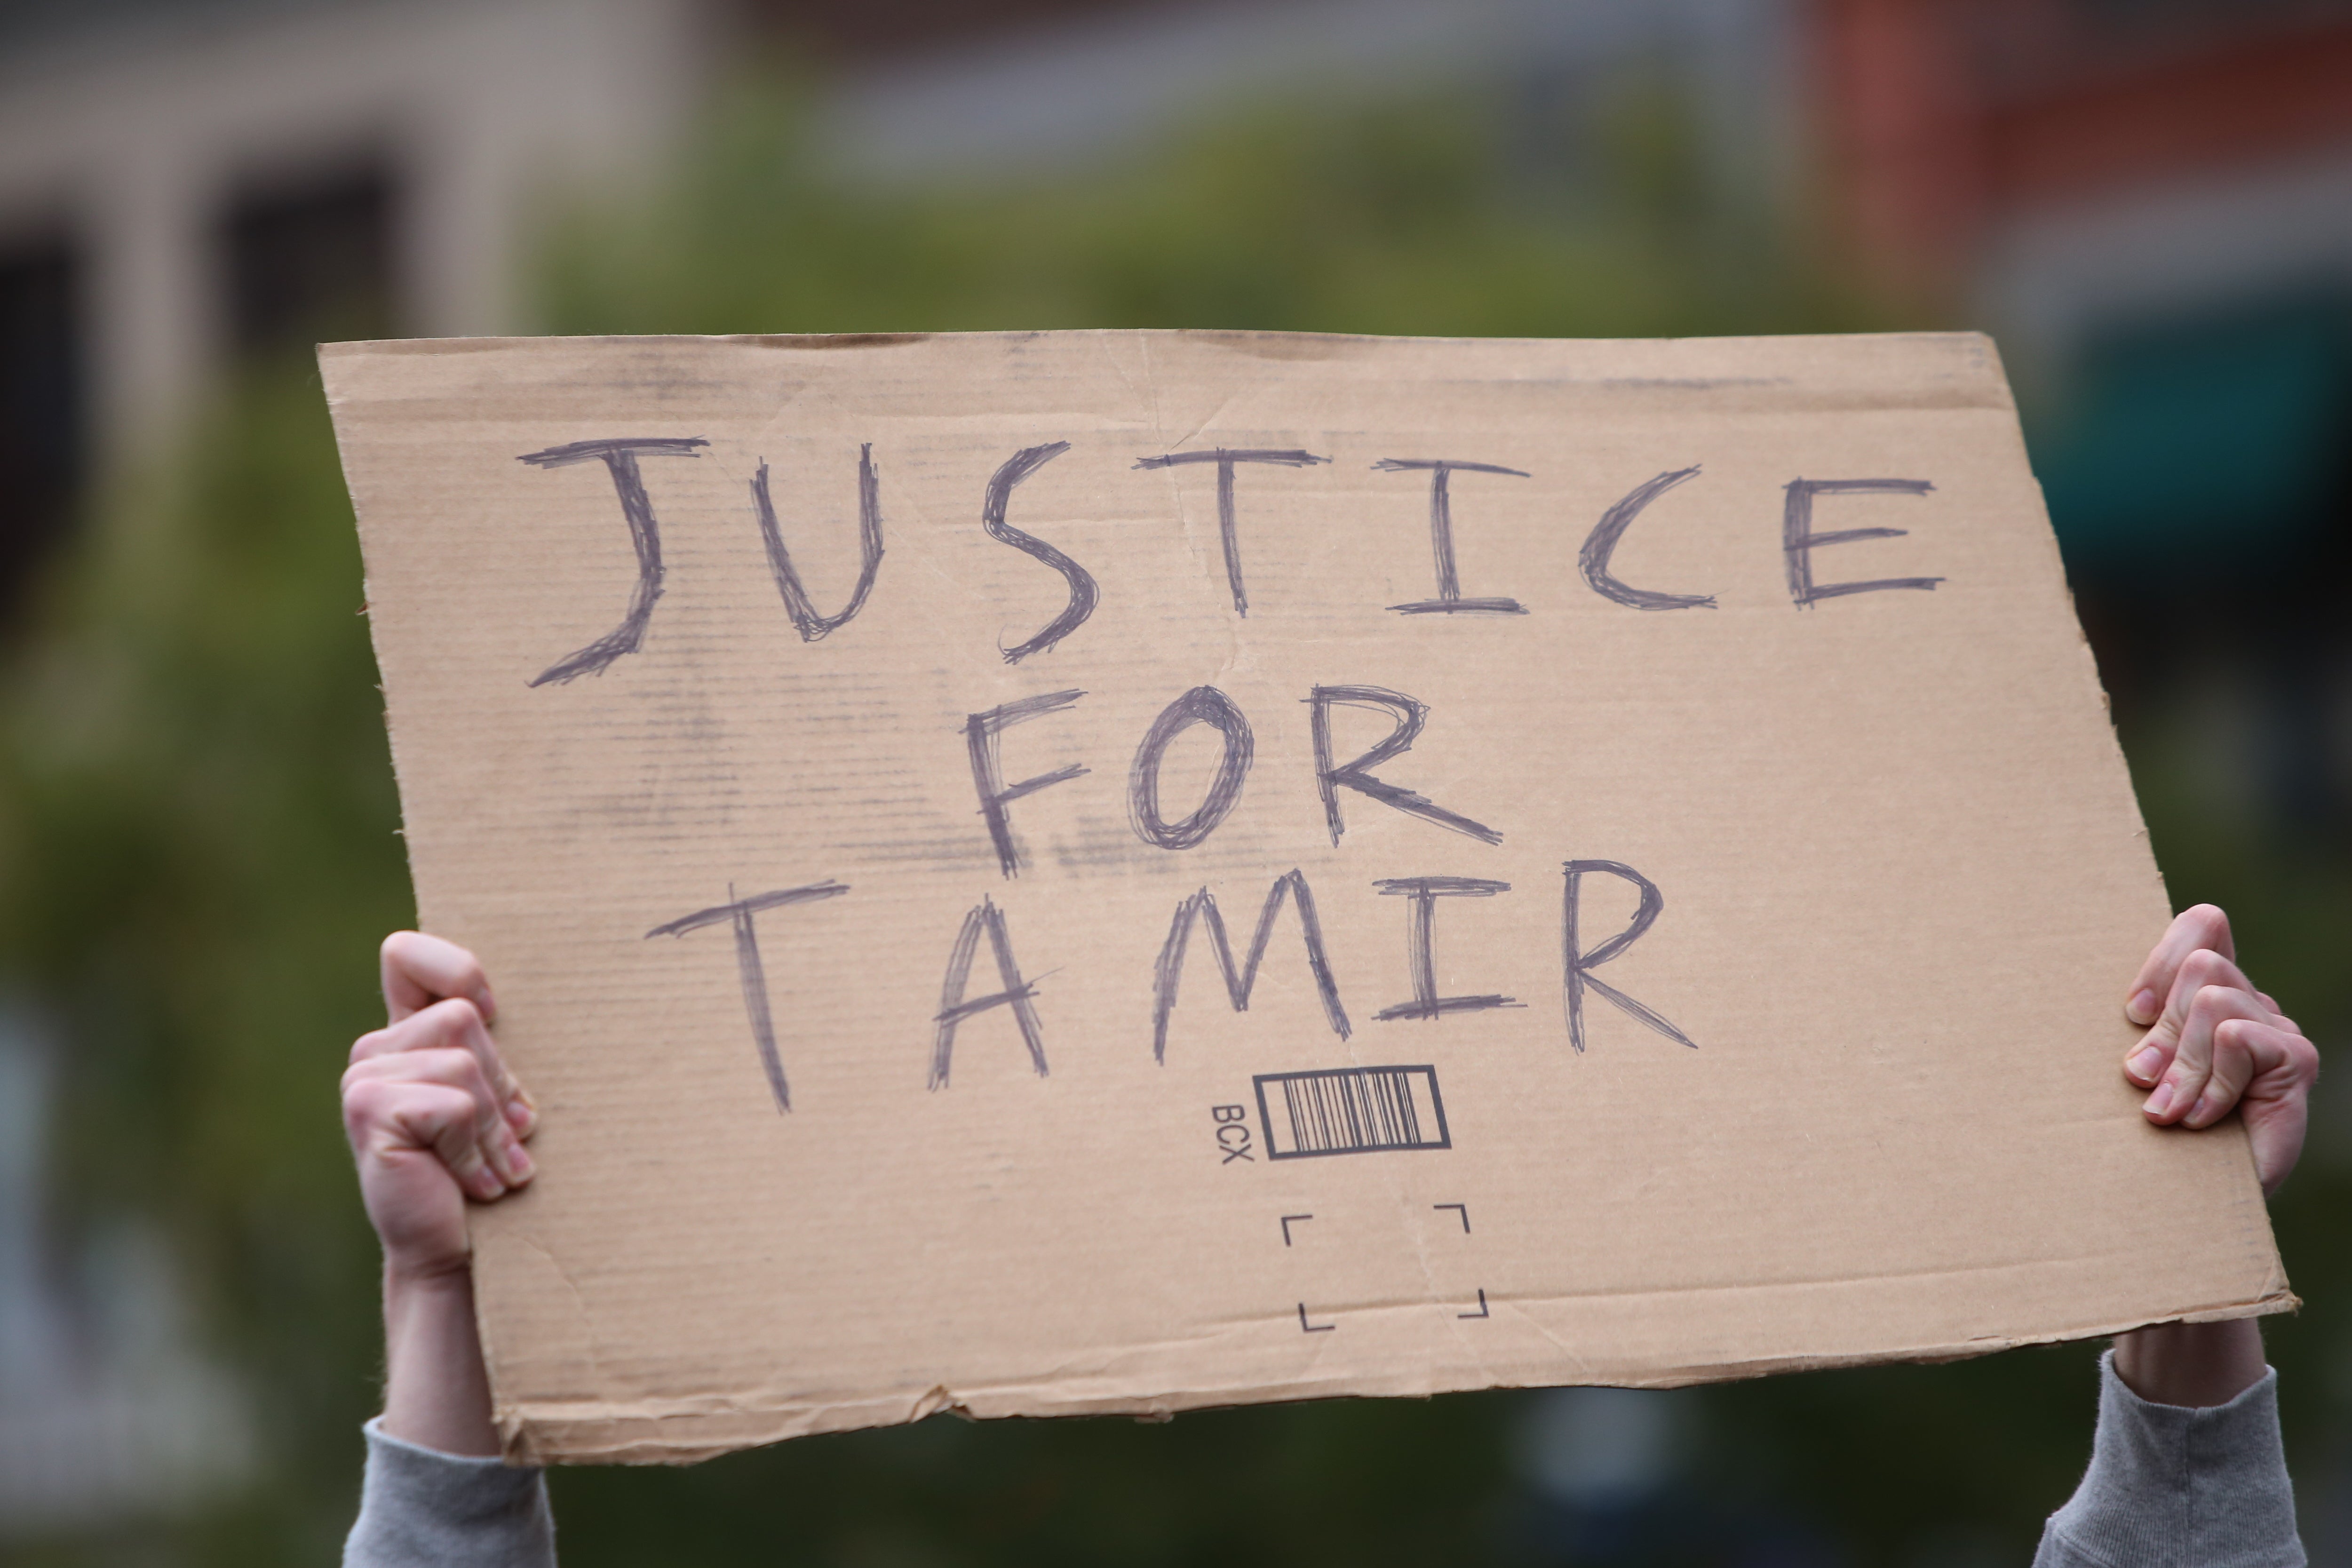 Police Officer Who Killed Tamir Rice Has Been Fired, But Not For What You Think
